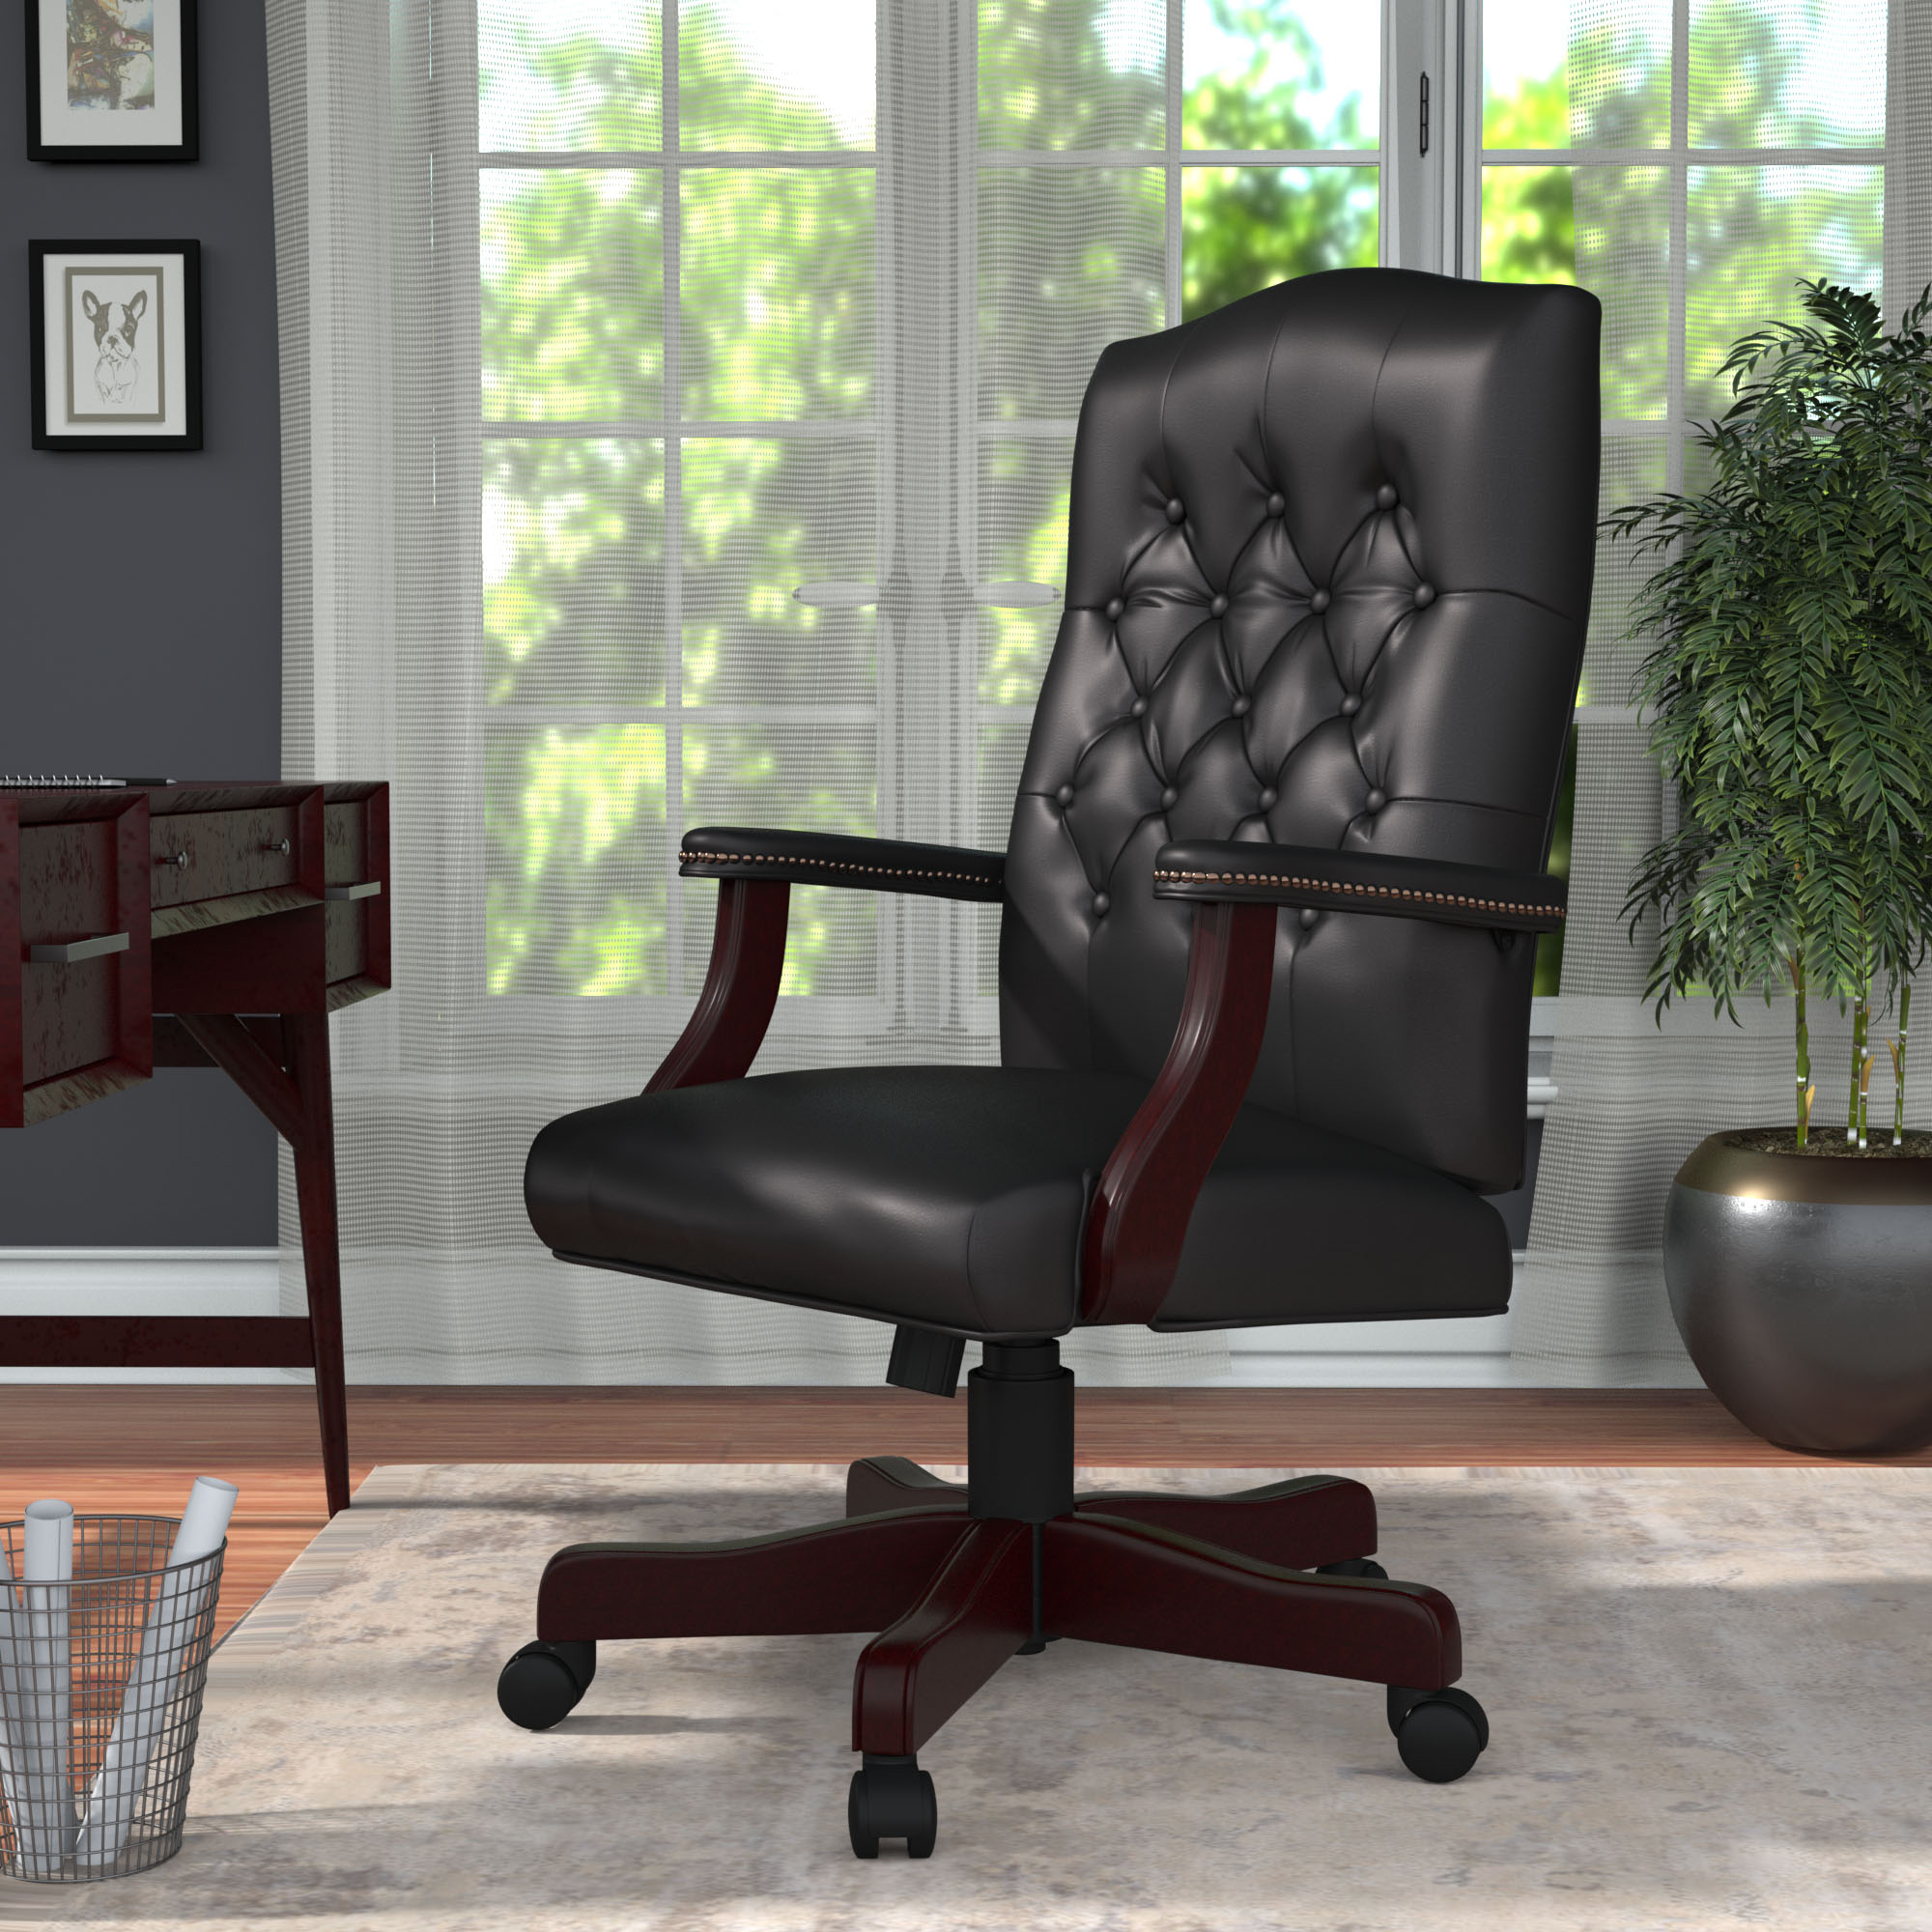 Boss Classic Black Caressoft Chair With Mahogany Finish – BossChair